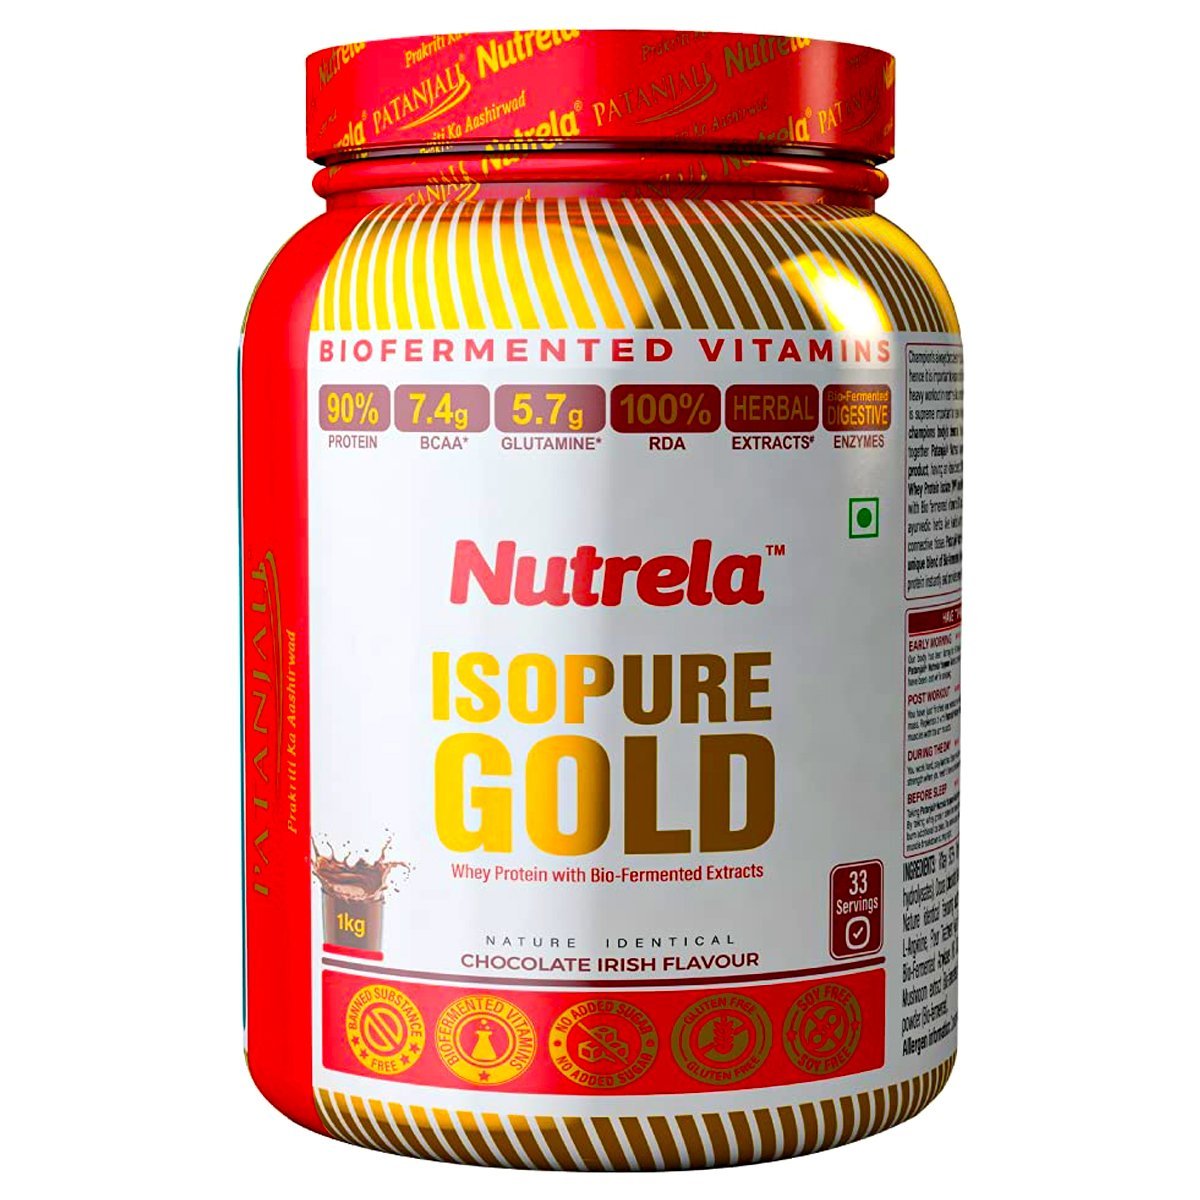 Patanjali Nutrela ISOPURE Gold 1kg Chocolate Flavour